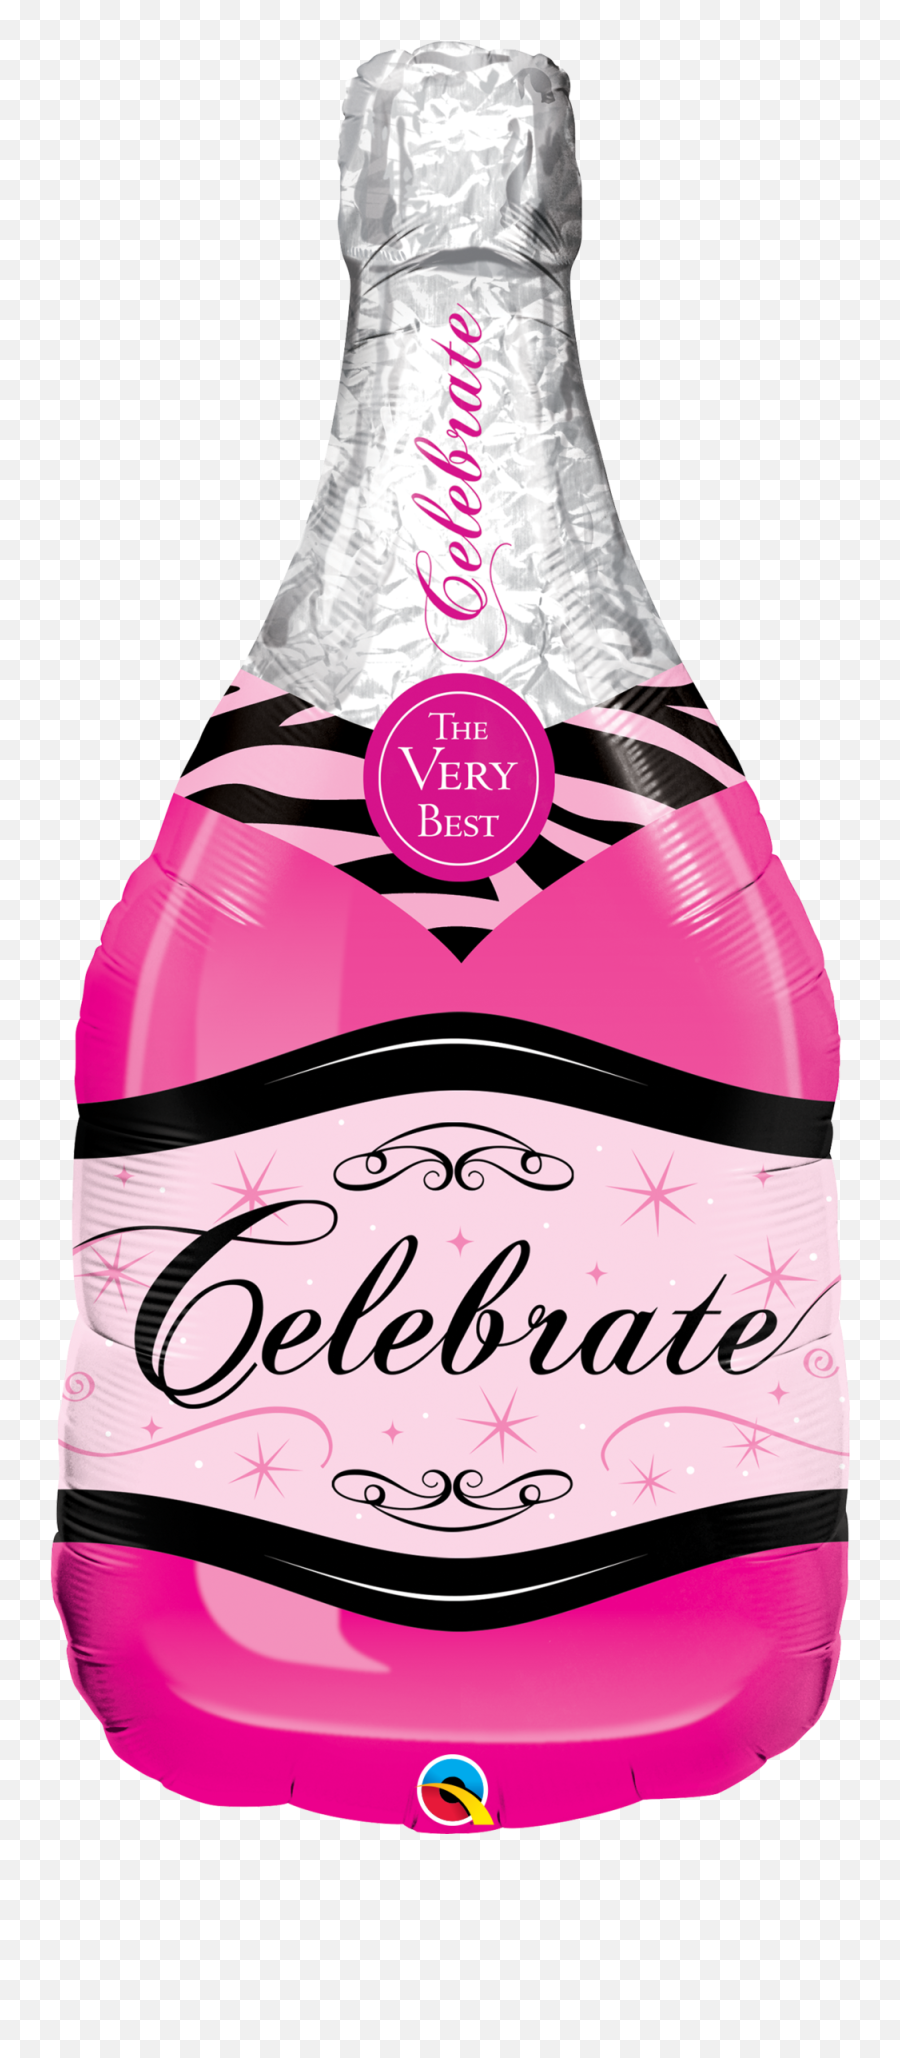 Pink Champagne Bottle U2014 Gifts And Party Emoji,Champagne Bottle Emoji